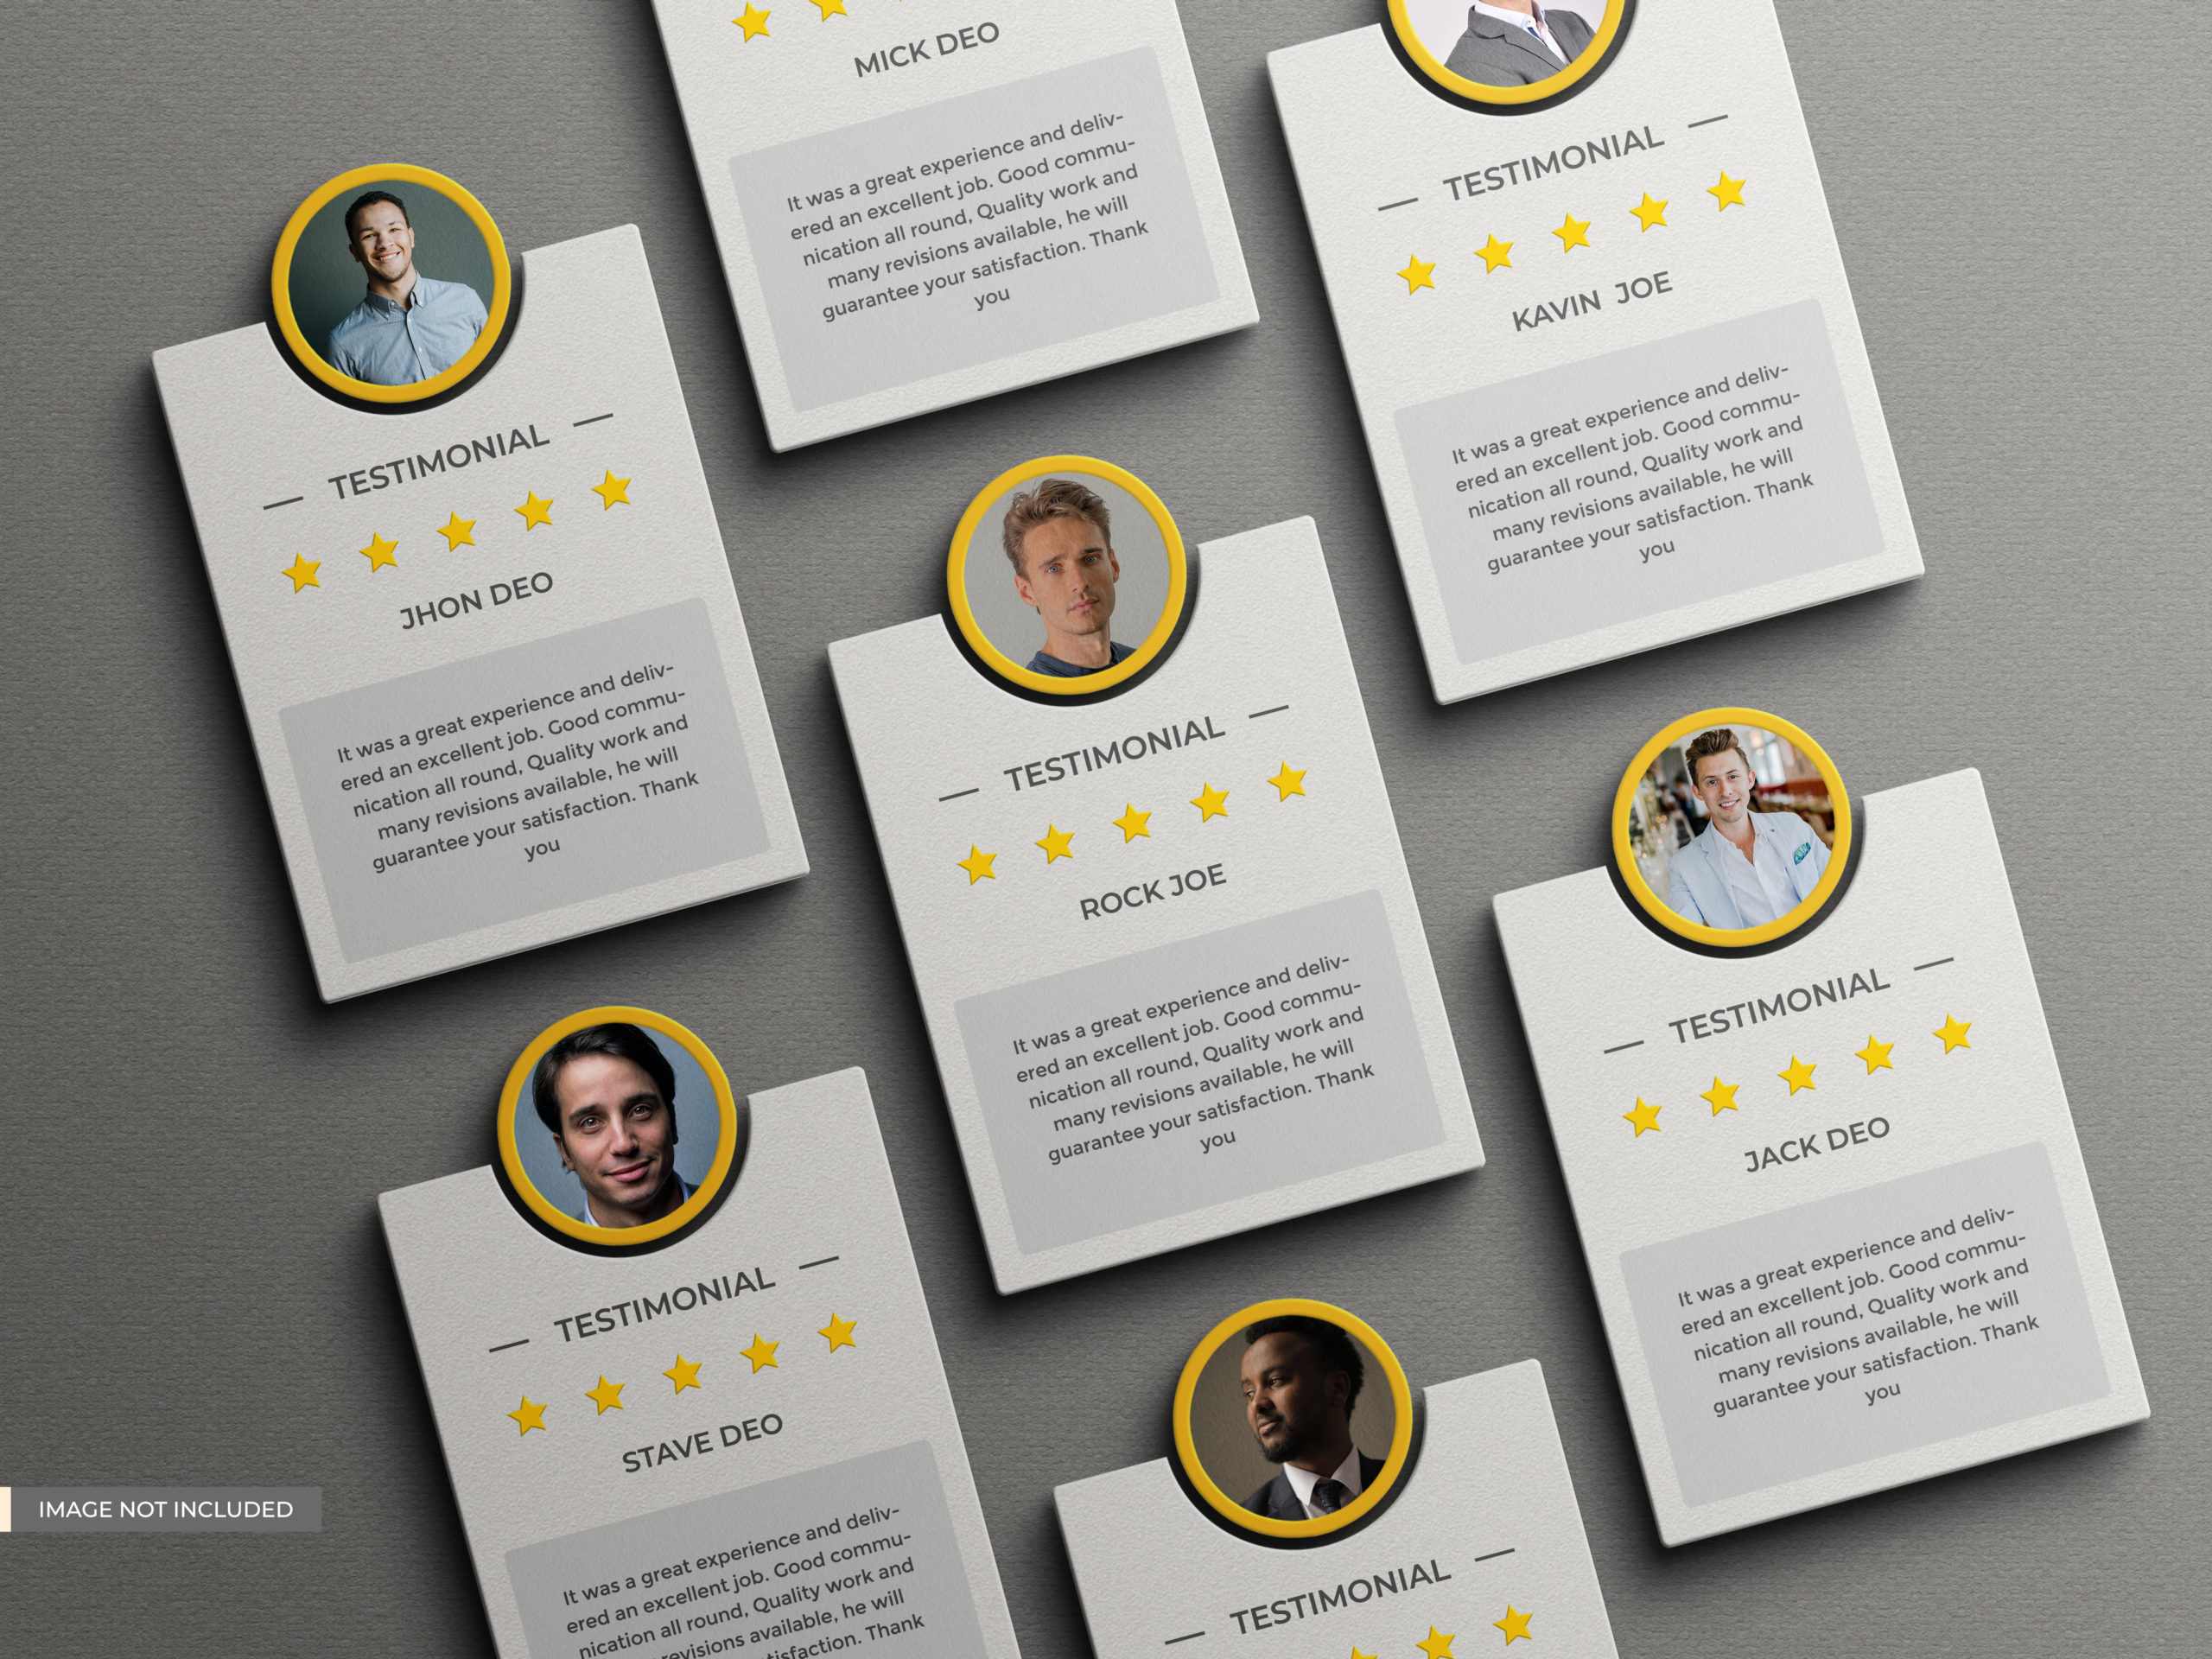 Strategies to get more Testimonials for your Online Course